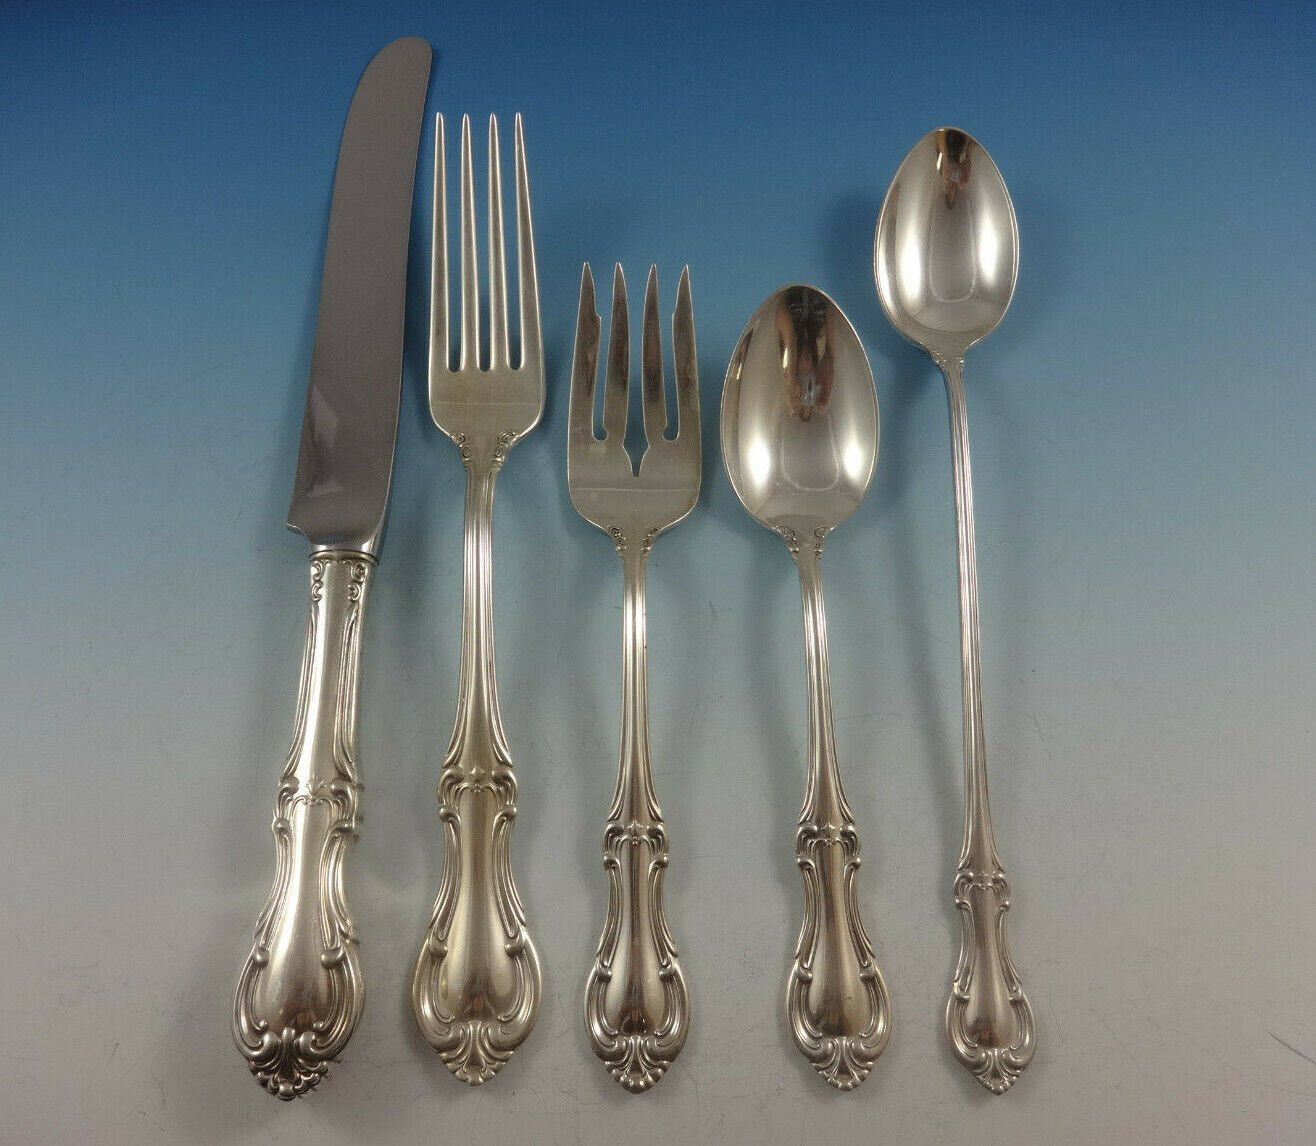 Joan of Arc by International Sterling Silver Flatware Set 8 Service 42 Pieces